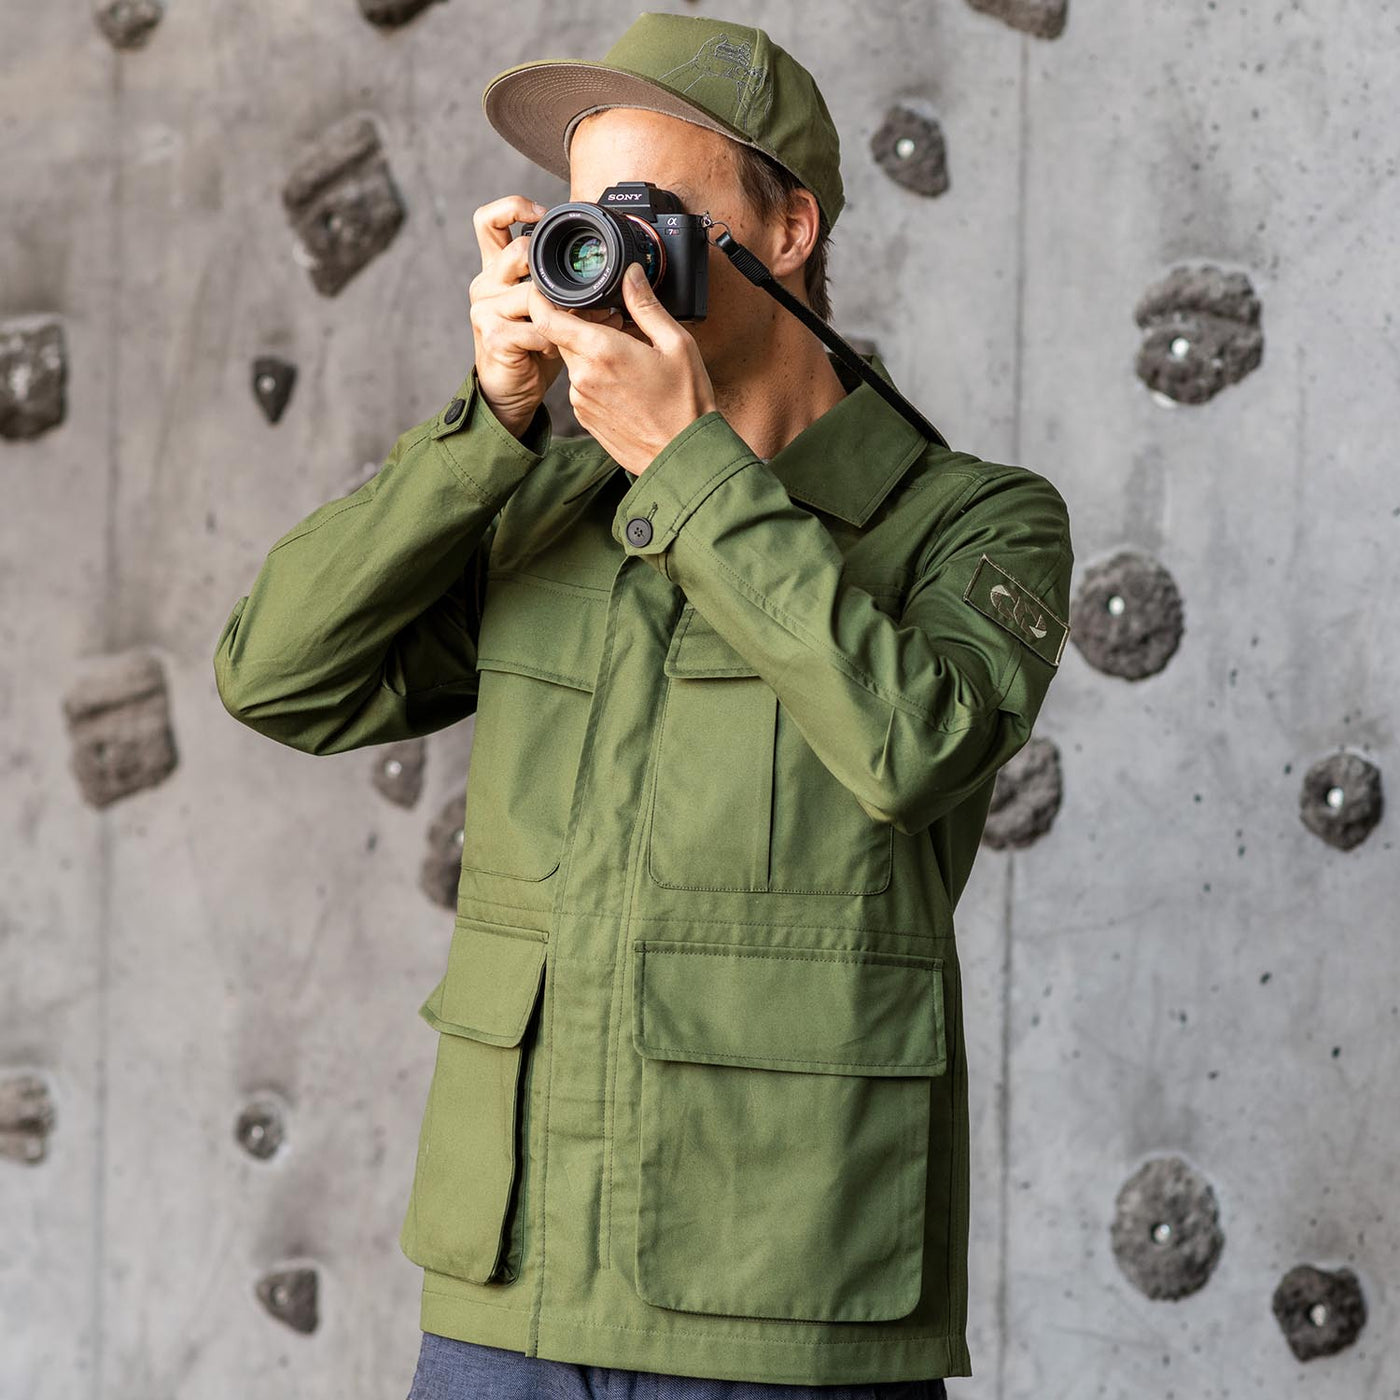 Photographer using a Sony camera wearing a olive field jacket 